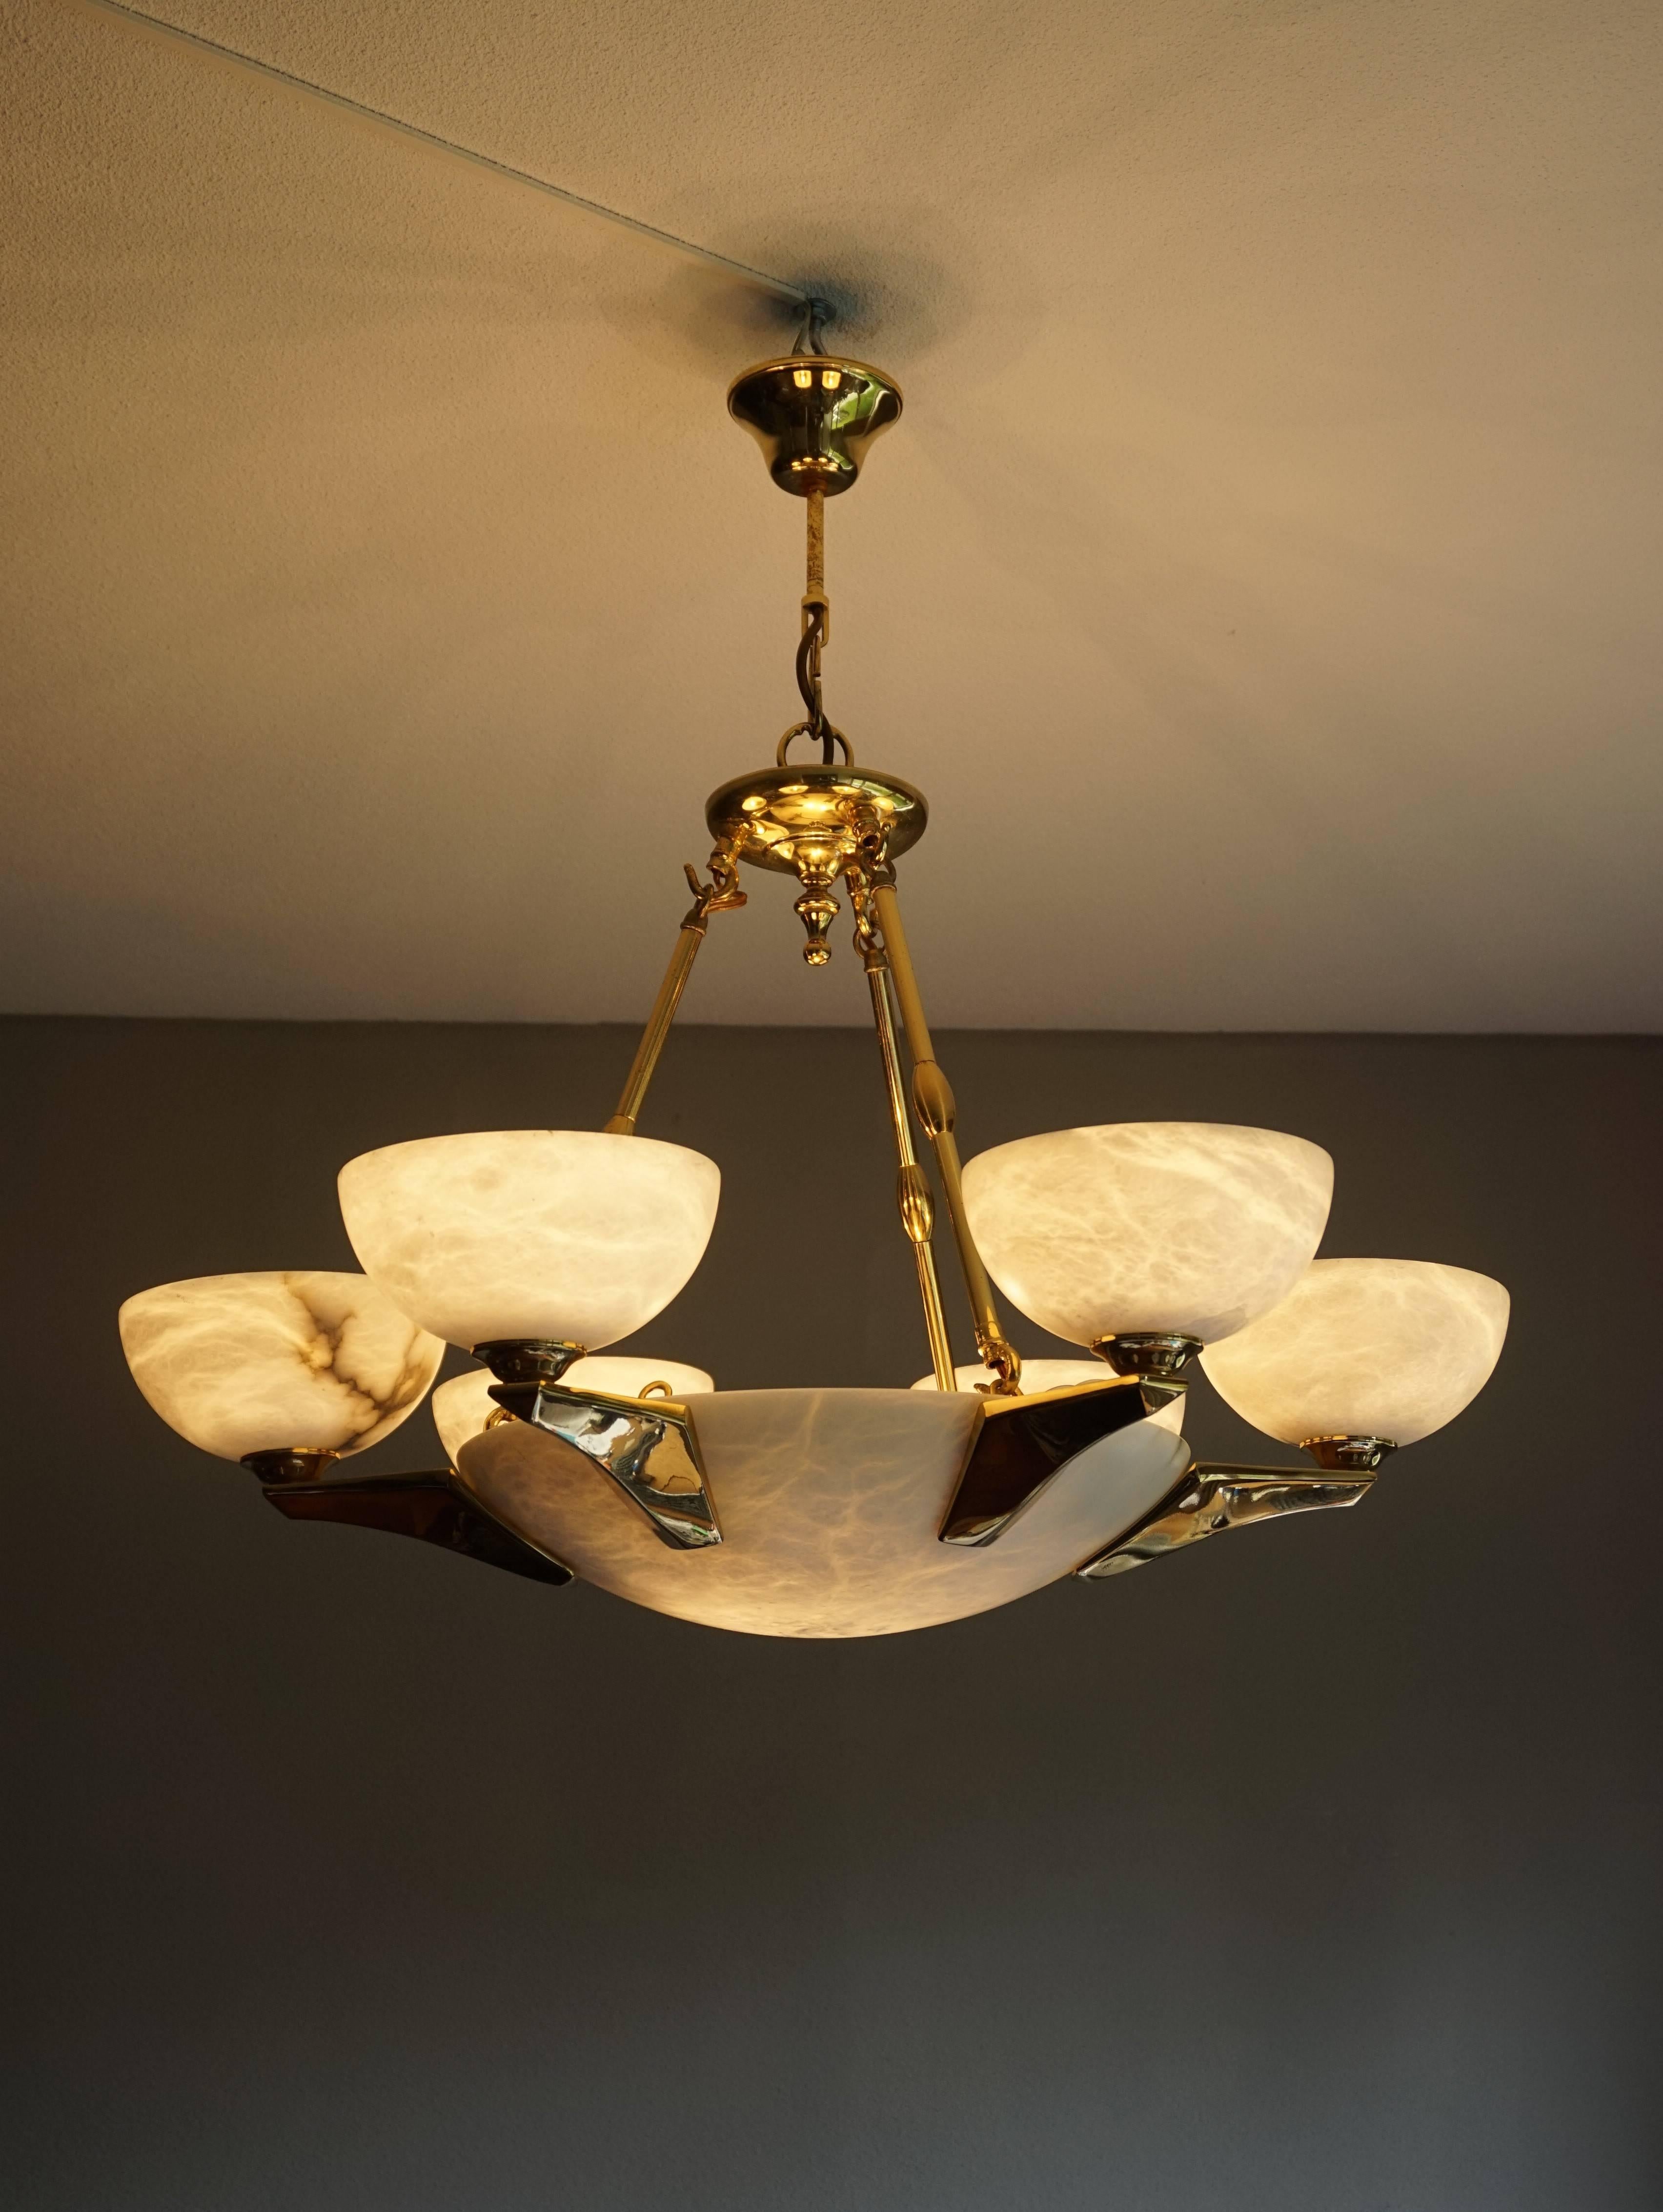 Excellent condition Spanish or Italian, Art Deco style chandelier.

If you like Art Deco chandeliers and pendants, but you would rather have them look like new then this 1970s alabaster shades and bronze arms light fixture could be perfect for